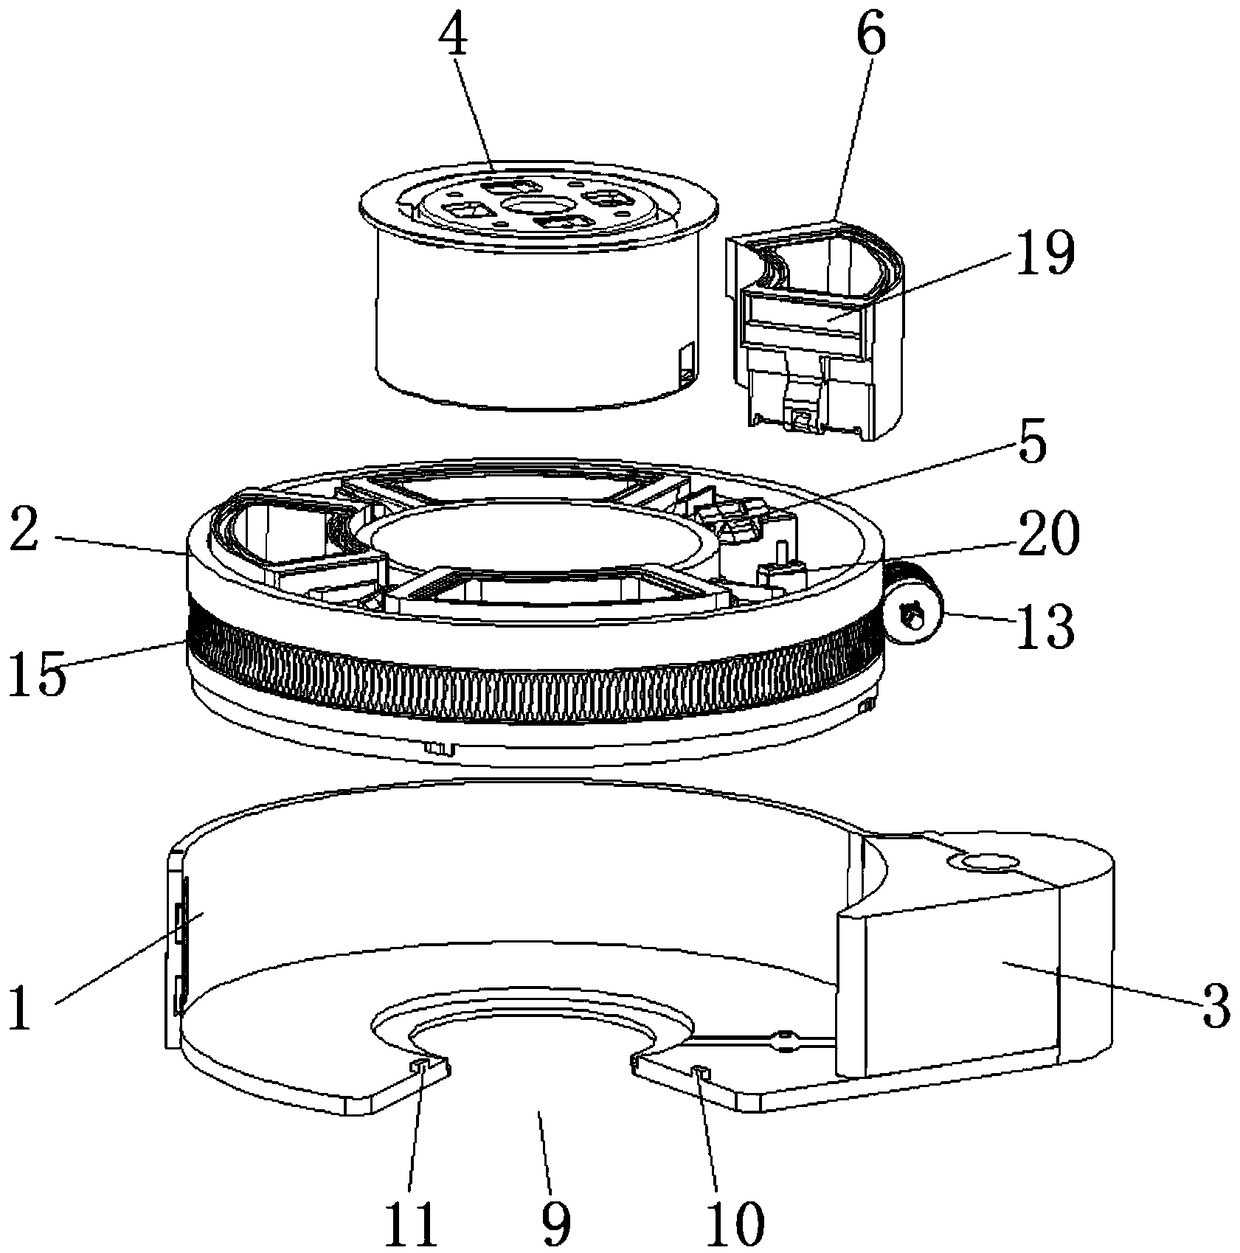 An automatic feeding device for food ingredients